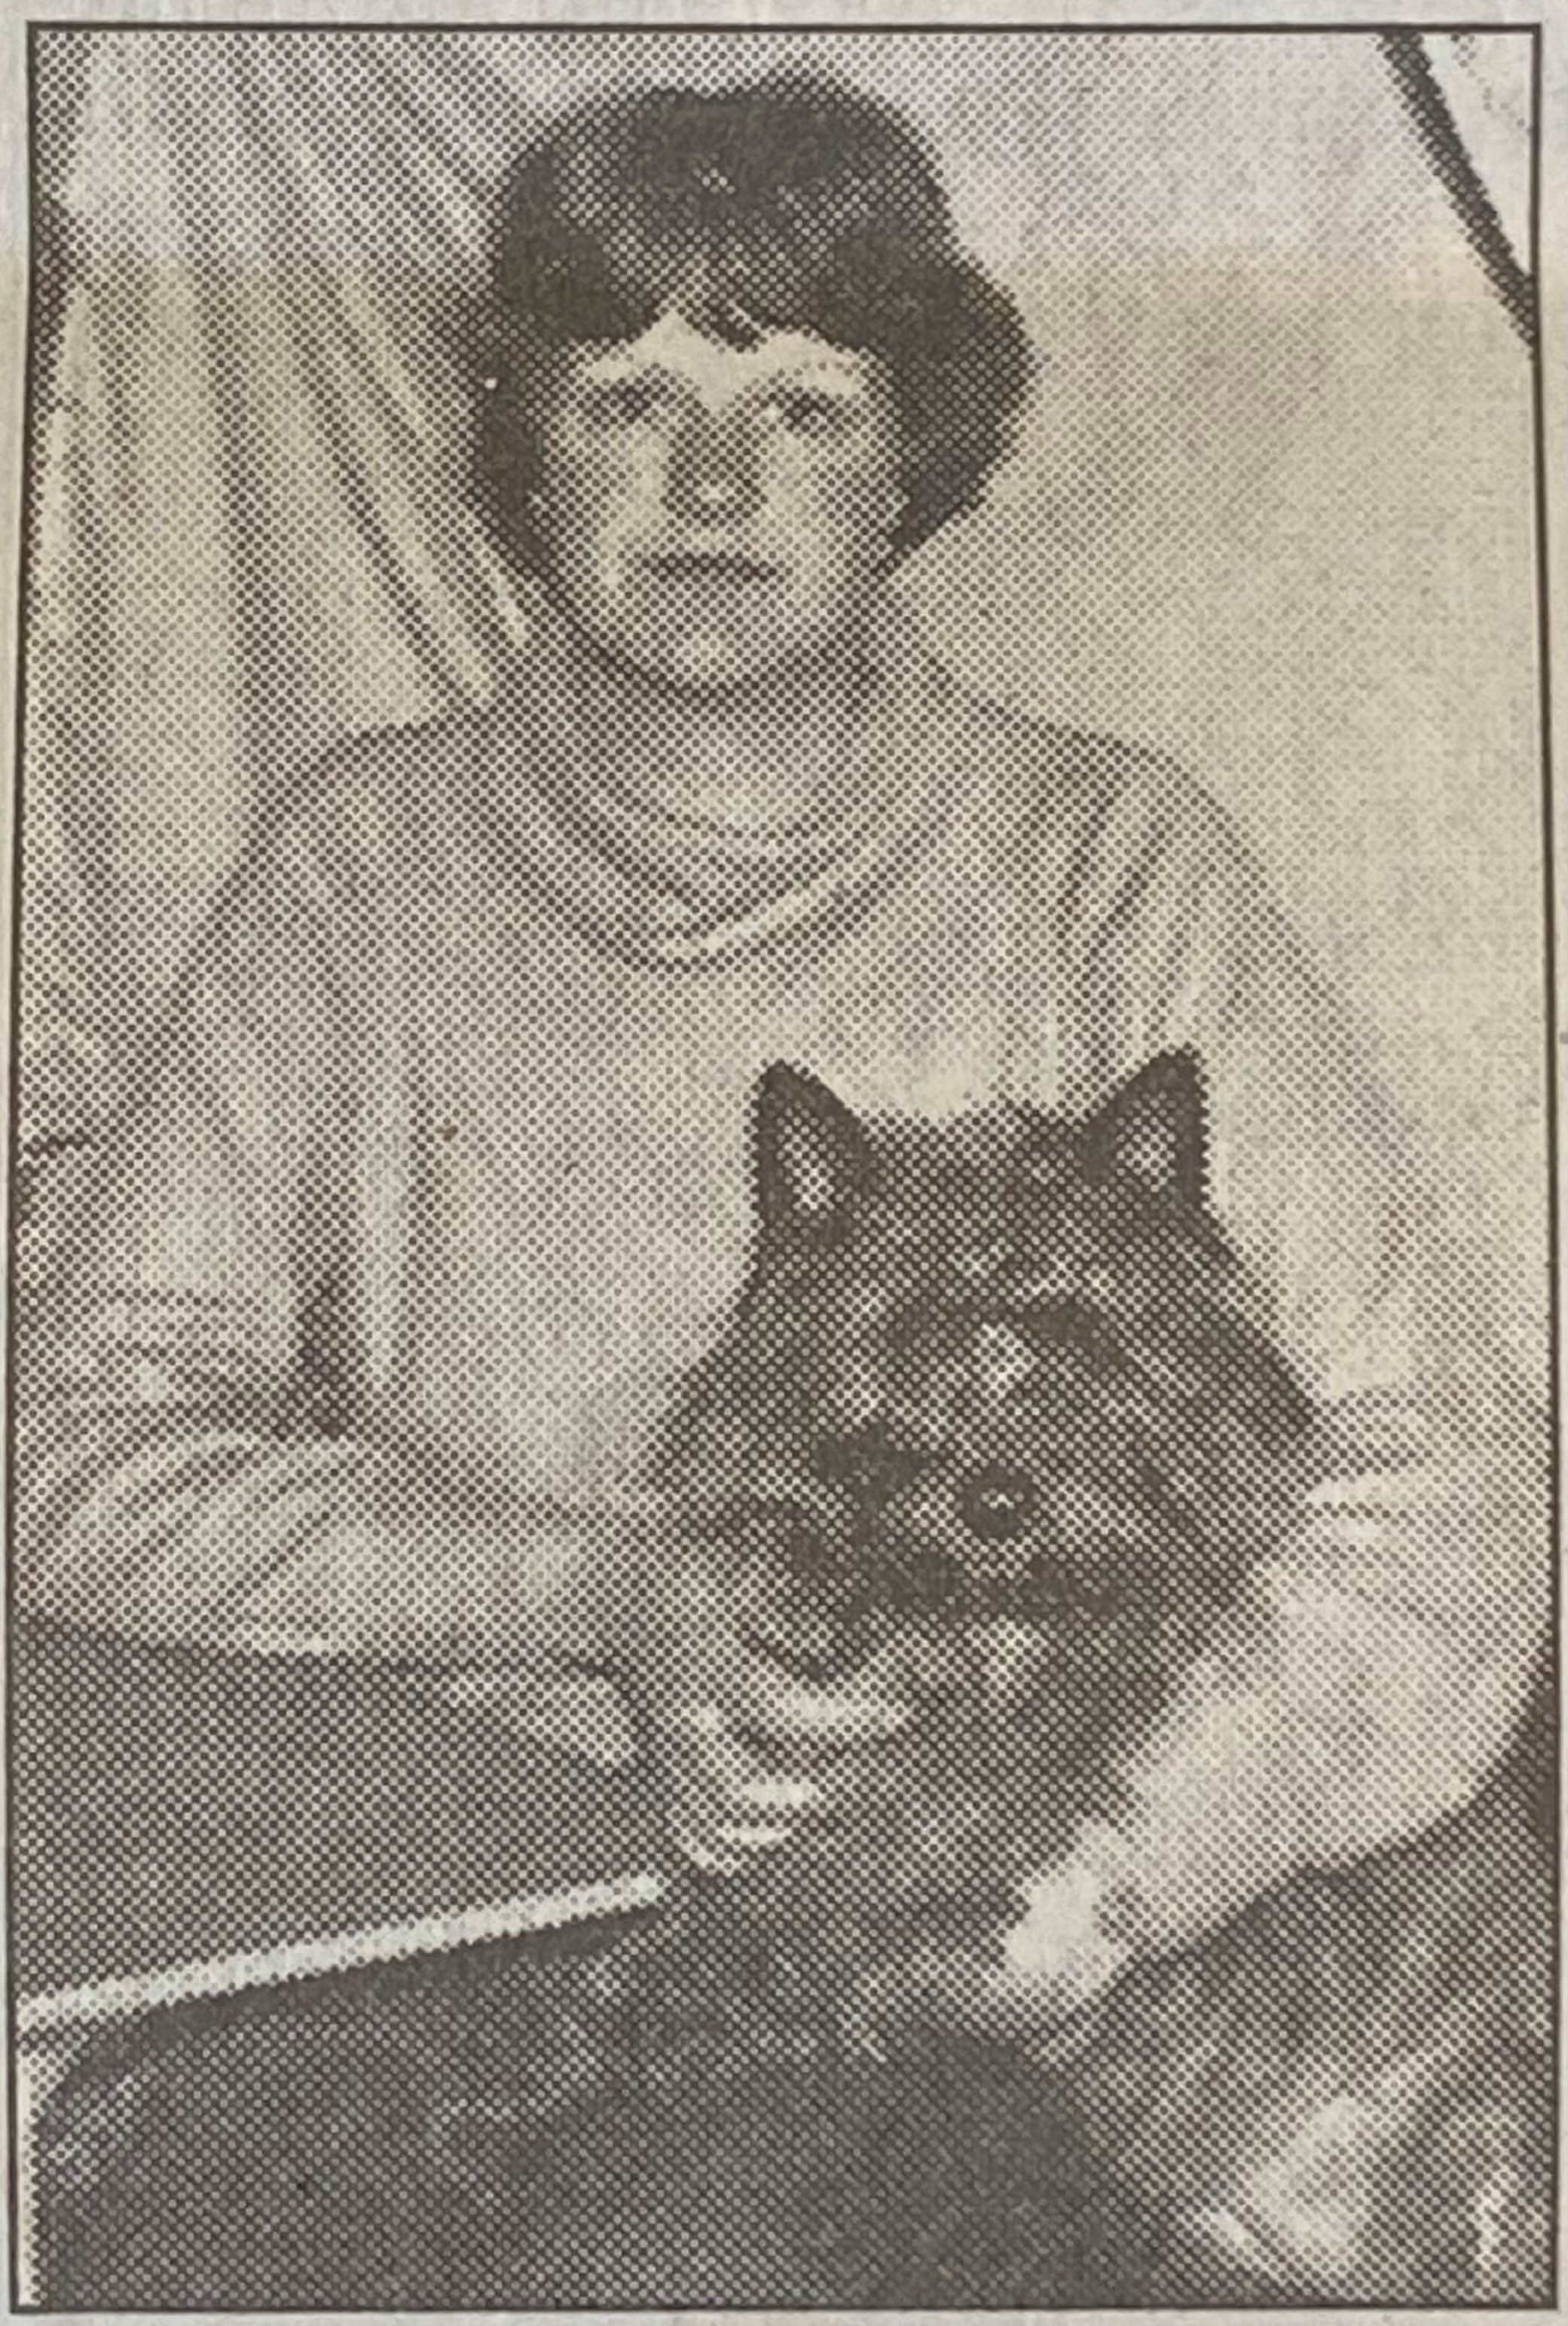 A black and white photo of Sandy as a teenager, sitting with a dog on her lap.